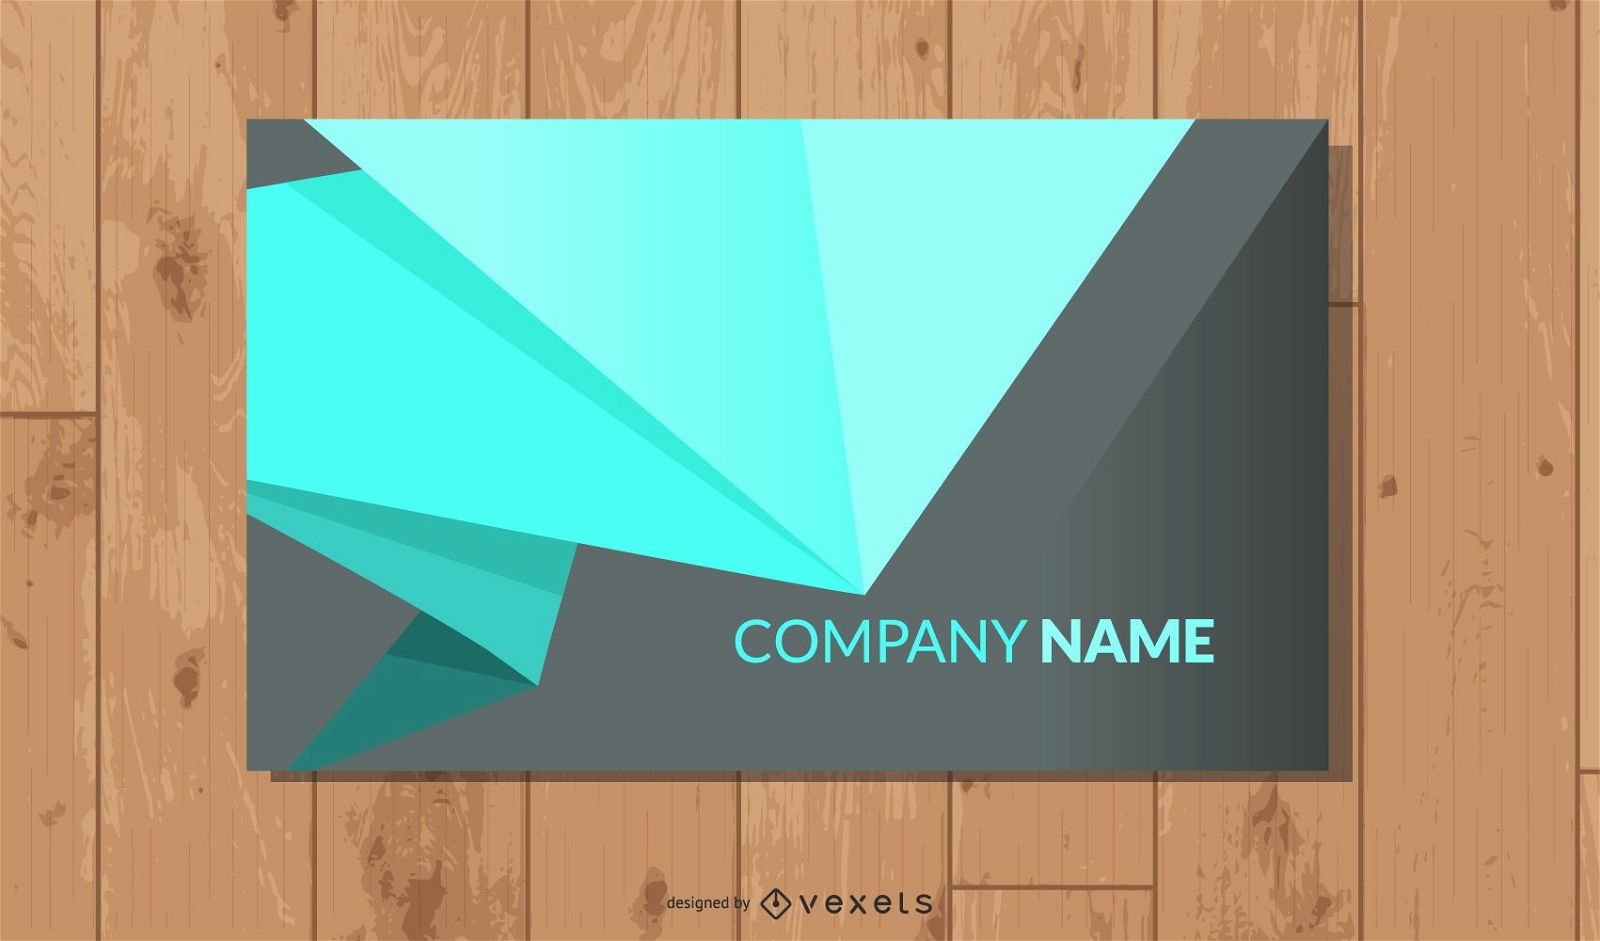 Clean & Simple Corporate Business Card